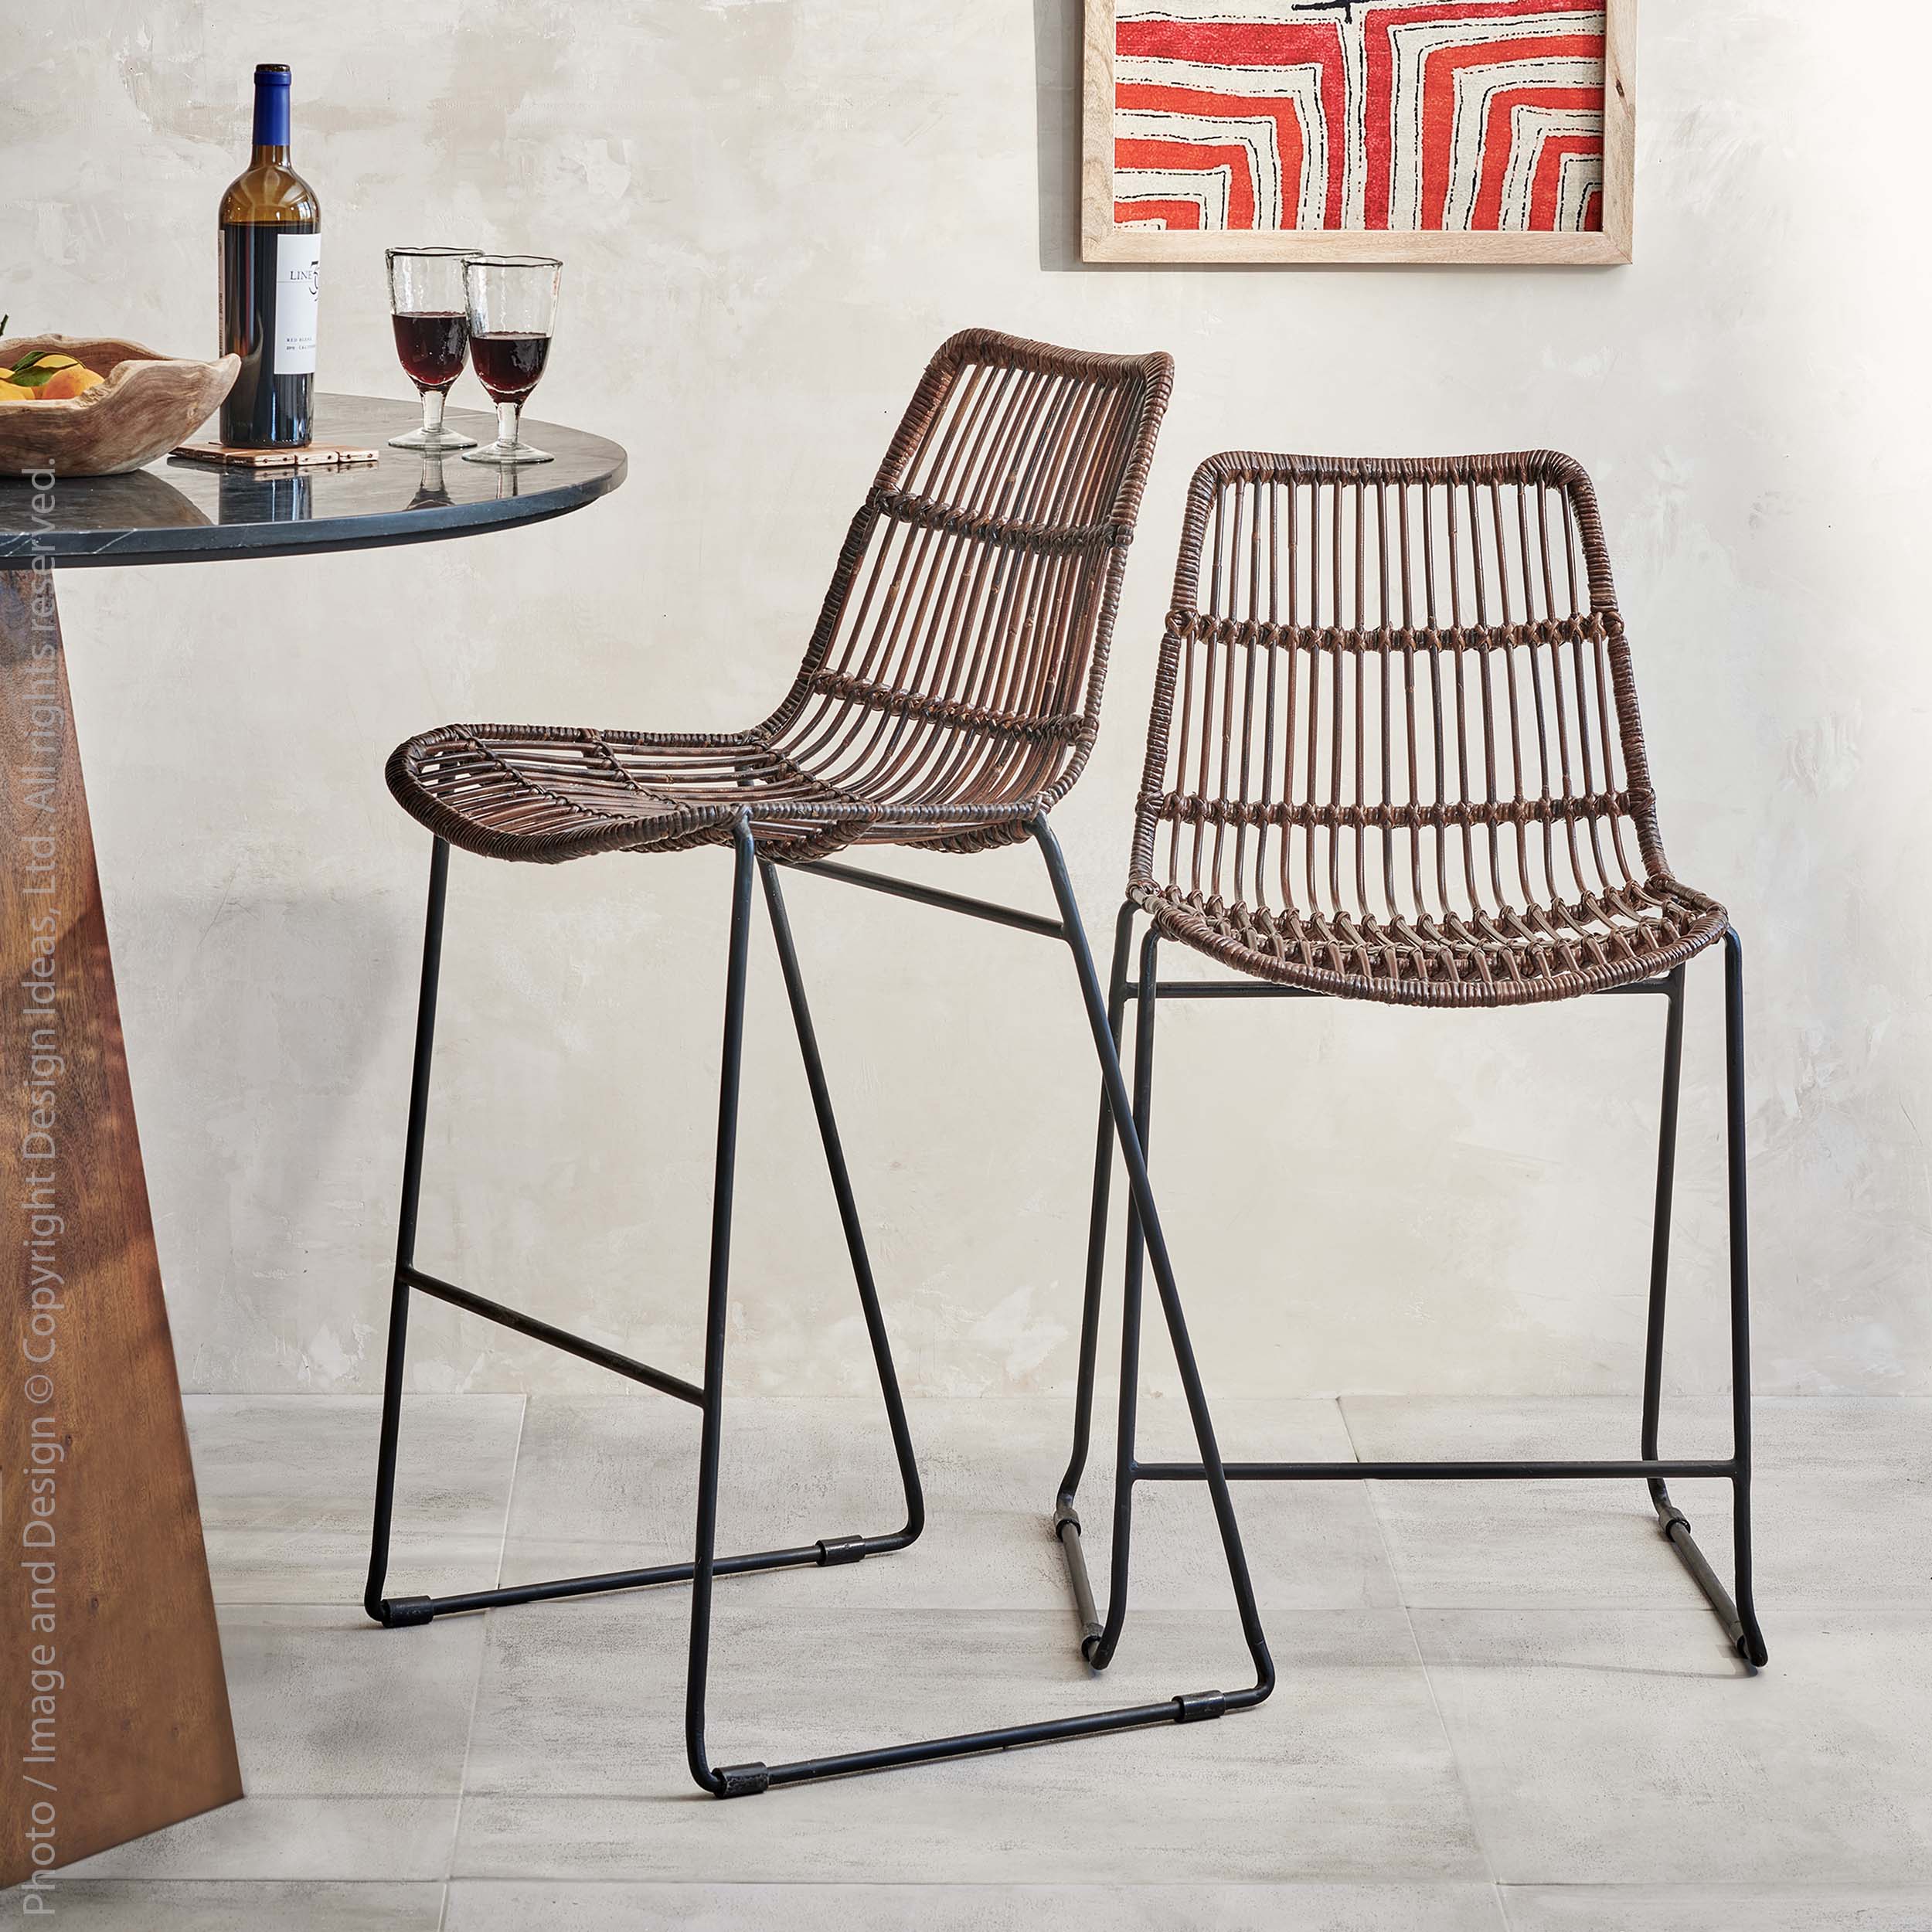 Brisbane™ Welded Iron, Woven Rattan and Steel Counter Stool - (colors: Natural) | Premium Stool from the Brisbane™ collection | made with Rattan and Steel for long lasting use